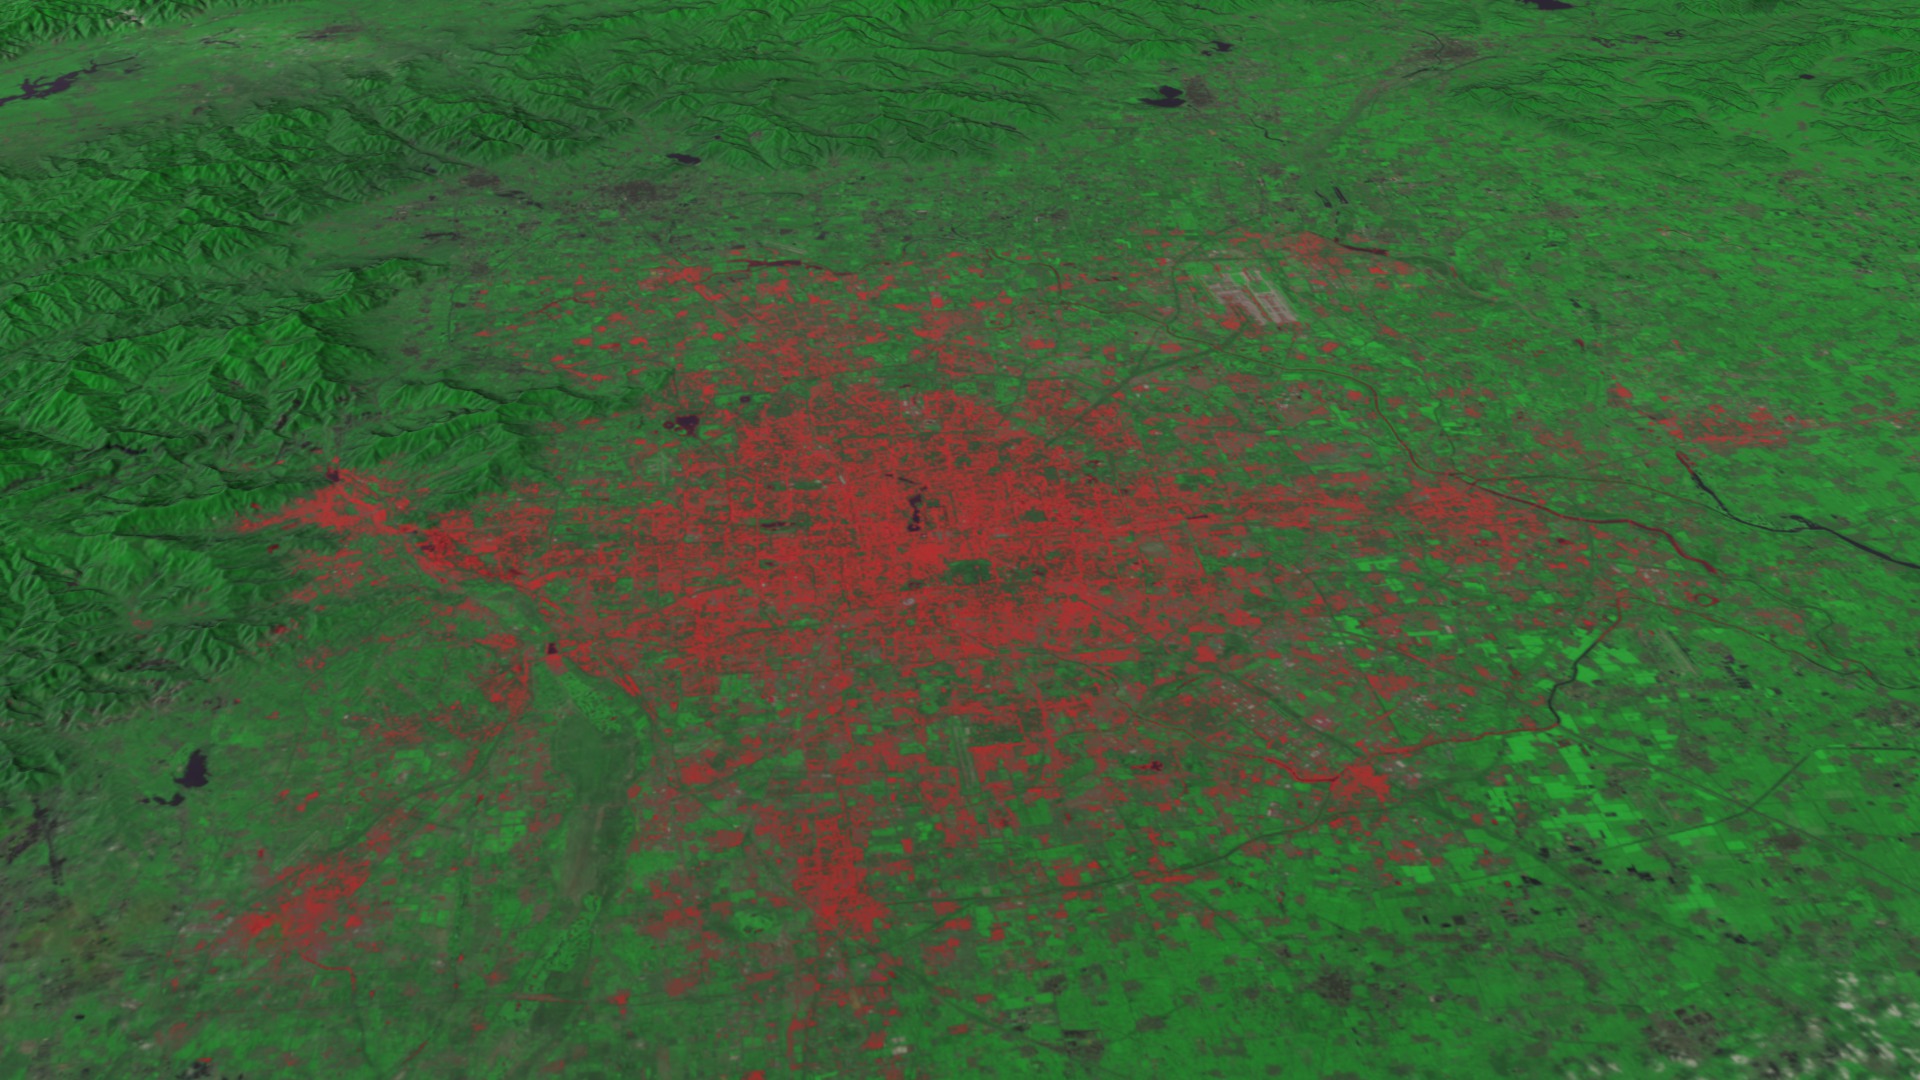 Animation zooming down to Beijing, China in 1978 via Landsat-3.  The data then dissolves to Beijing in 2010 through the sensors of Landsat-5.  The red areas are non-vegetated urban areas.